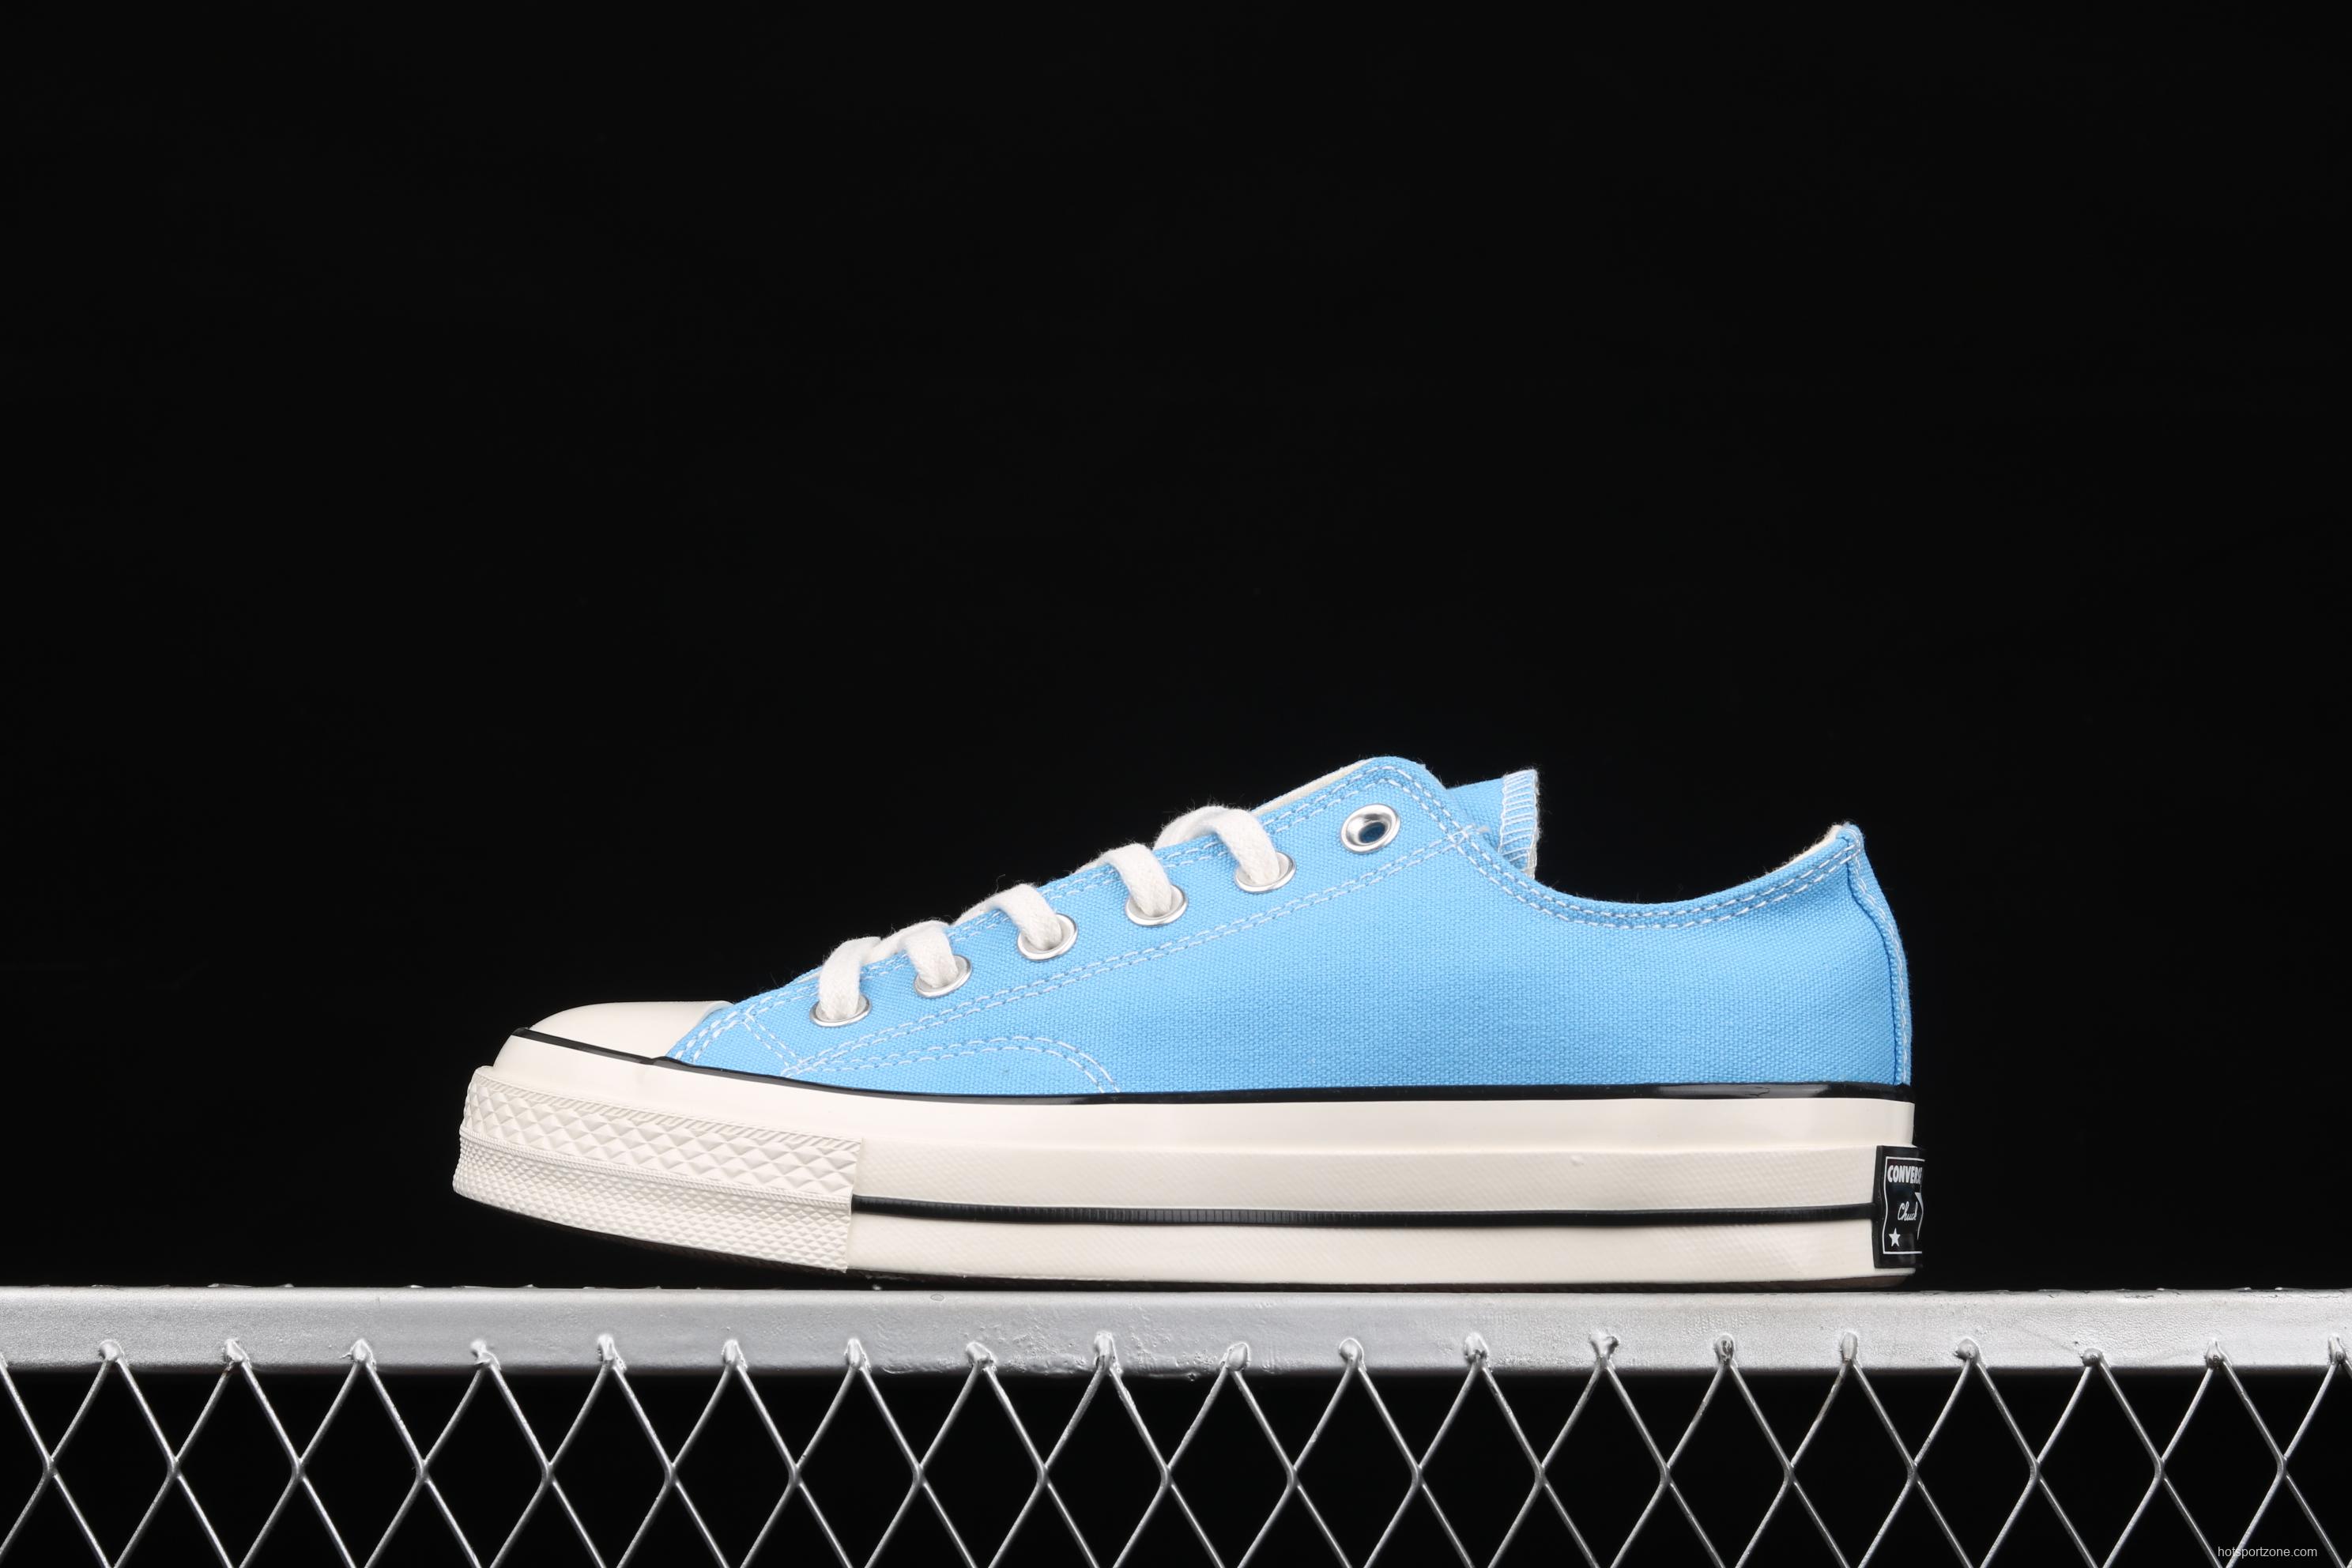 Converse Chuck 70s new spring color lake water blue matching low-top casual board shoes 171569C